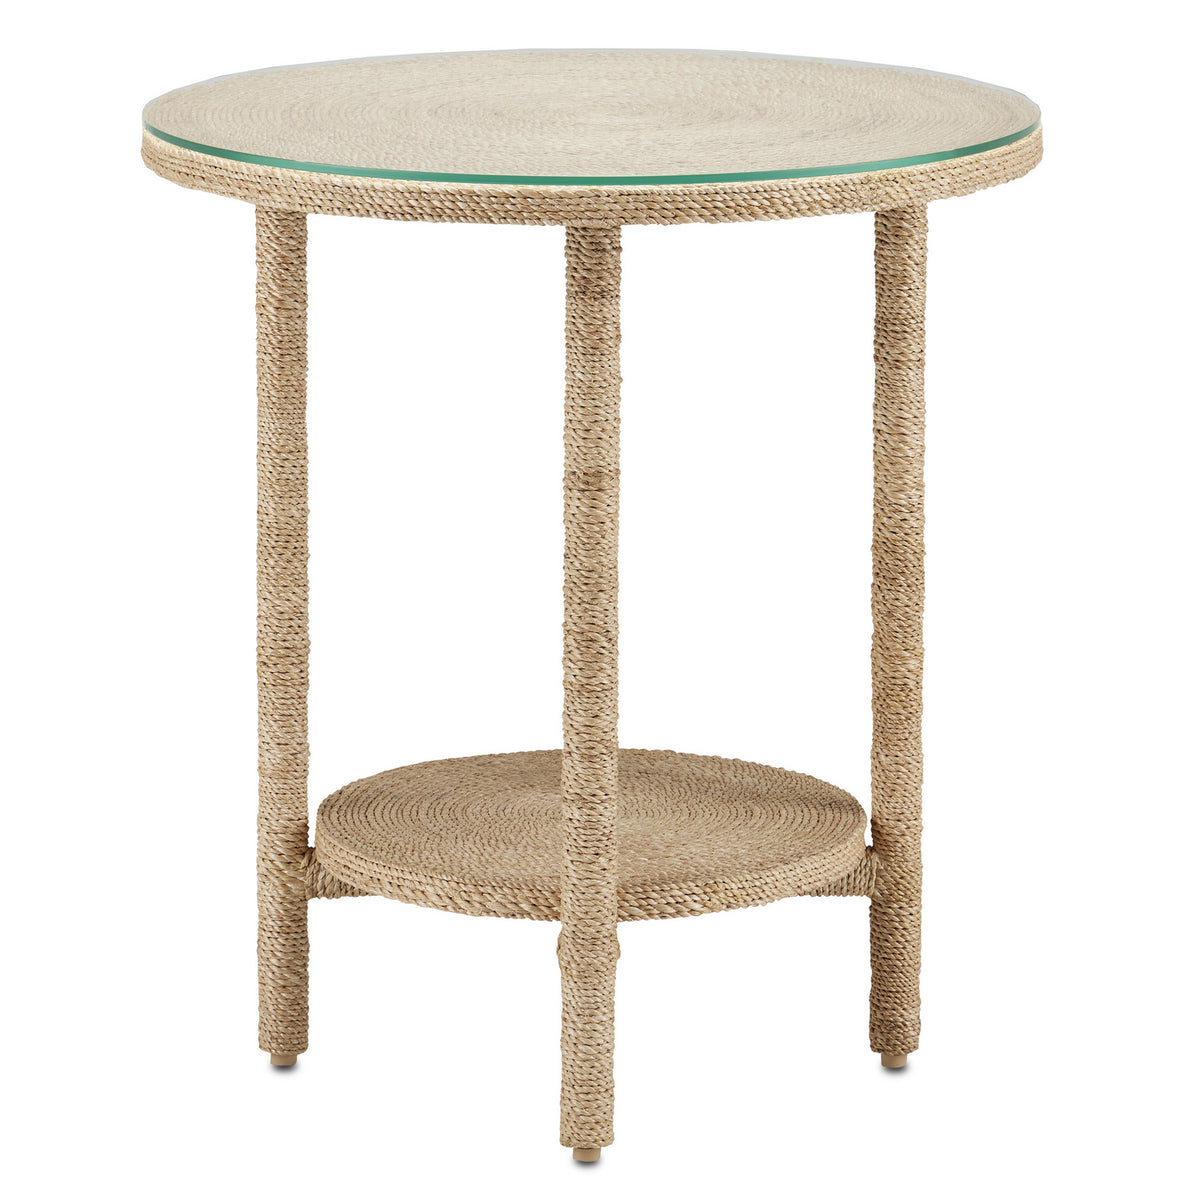 Currey and Company - 3000-0215 - Accent Table - Limay - Natural Rope